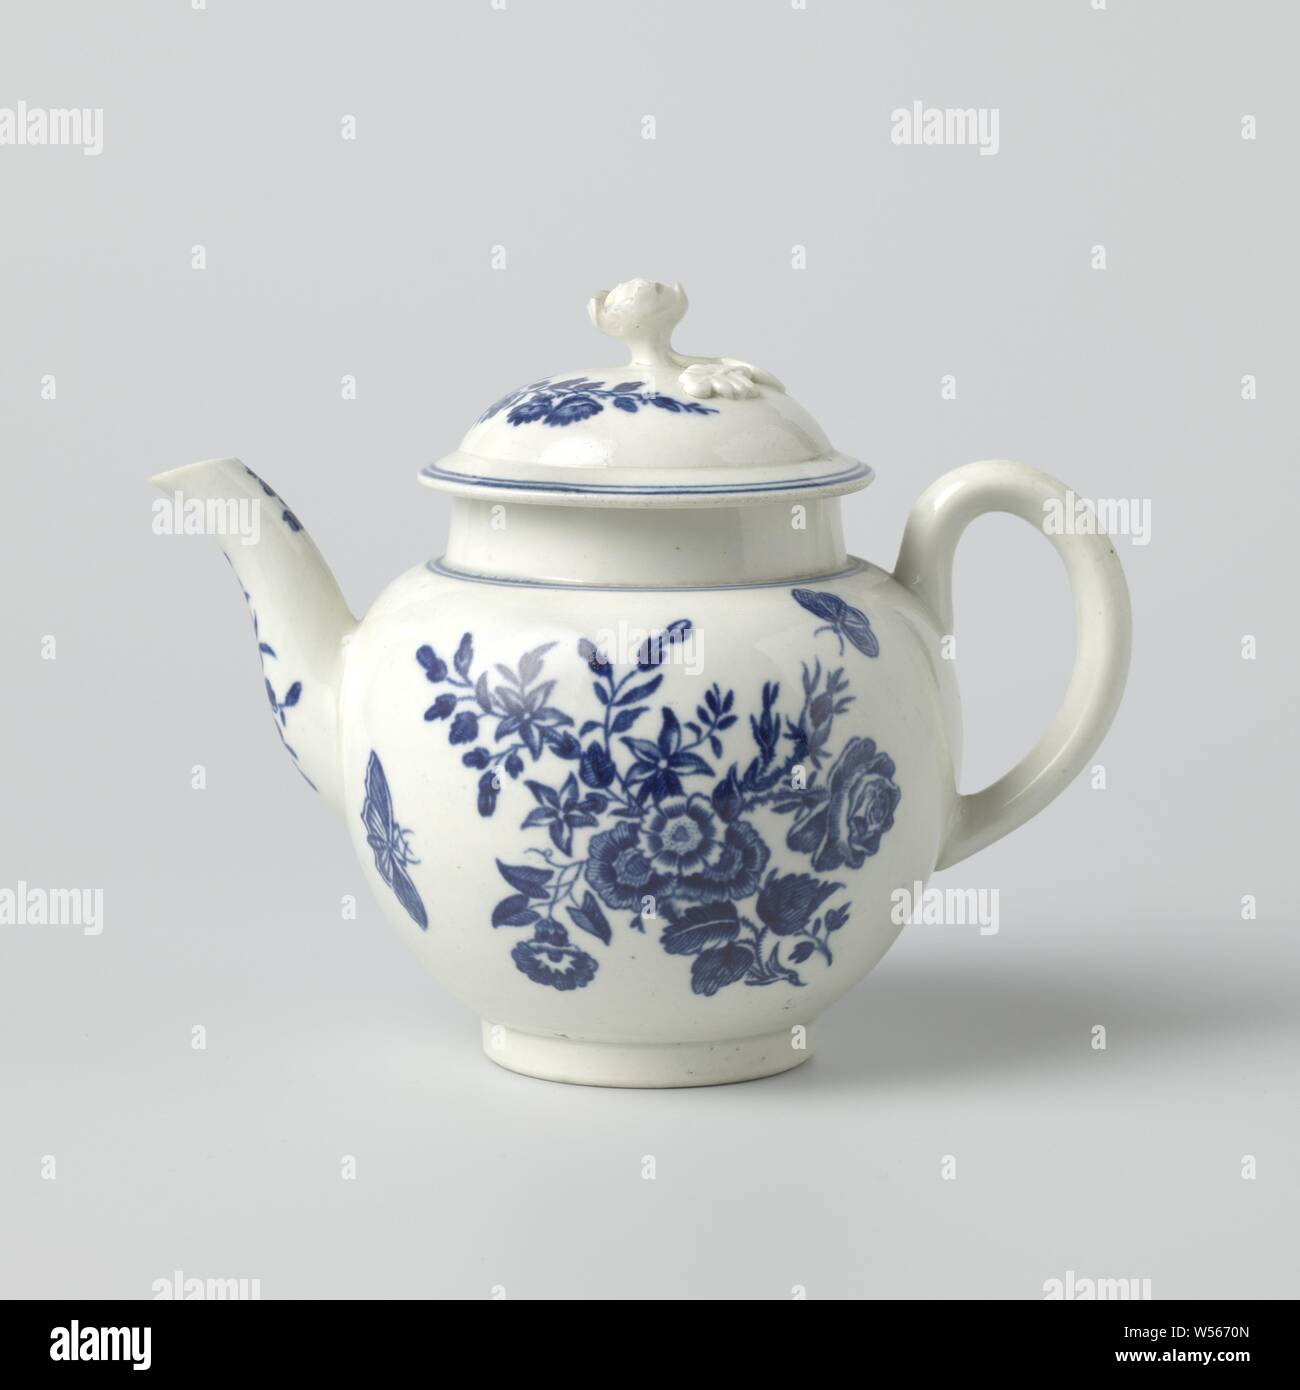 Drawing pot with painted flowers and insects, Porcelain drawing pot, painted with blue flowers and insects on white ground. Marked with letter L., Langley, Langley Mill, 1790 - 1800, porcelain (material), h 12.8 cm w 16.0 cm × d 10.1 cm h 9.8 cm h 4 cm Stock Photo